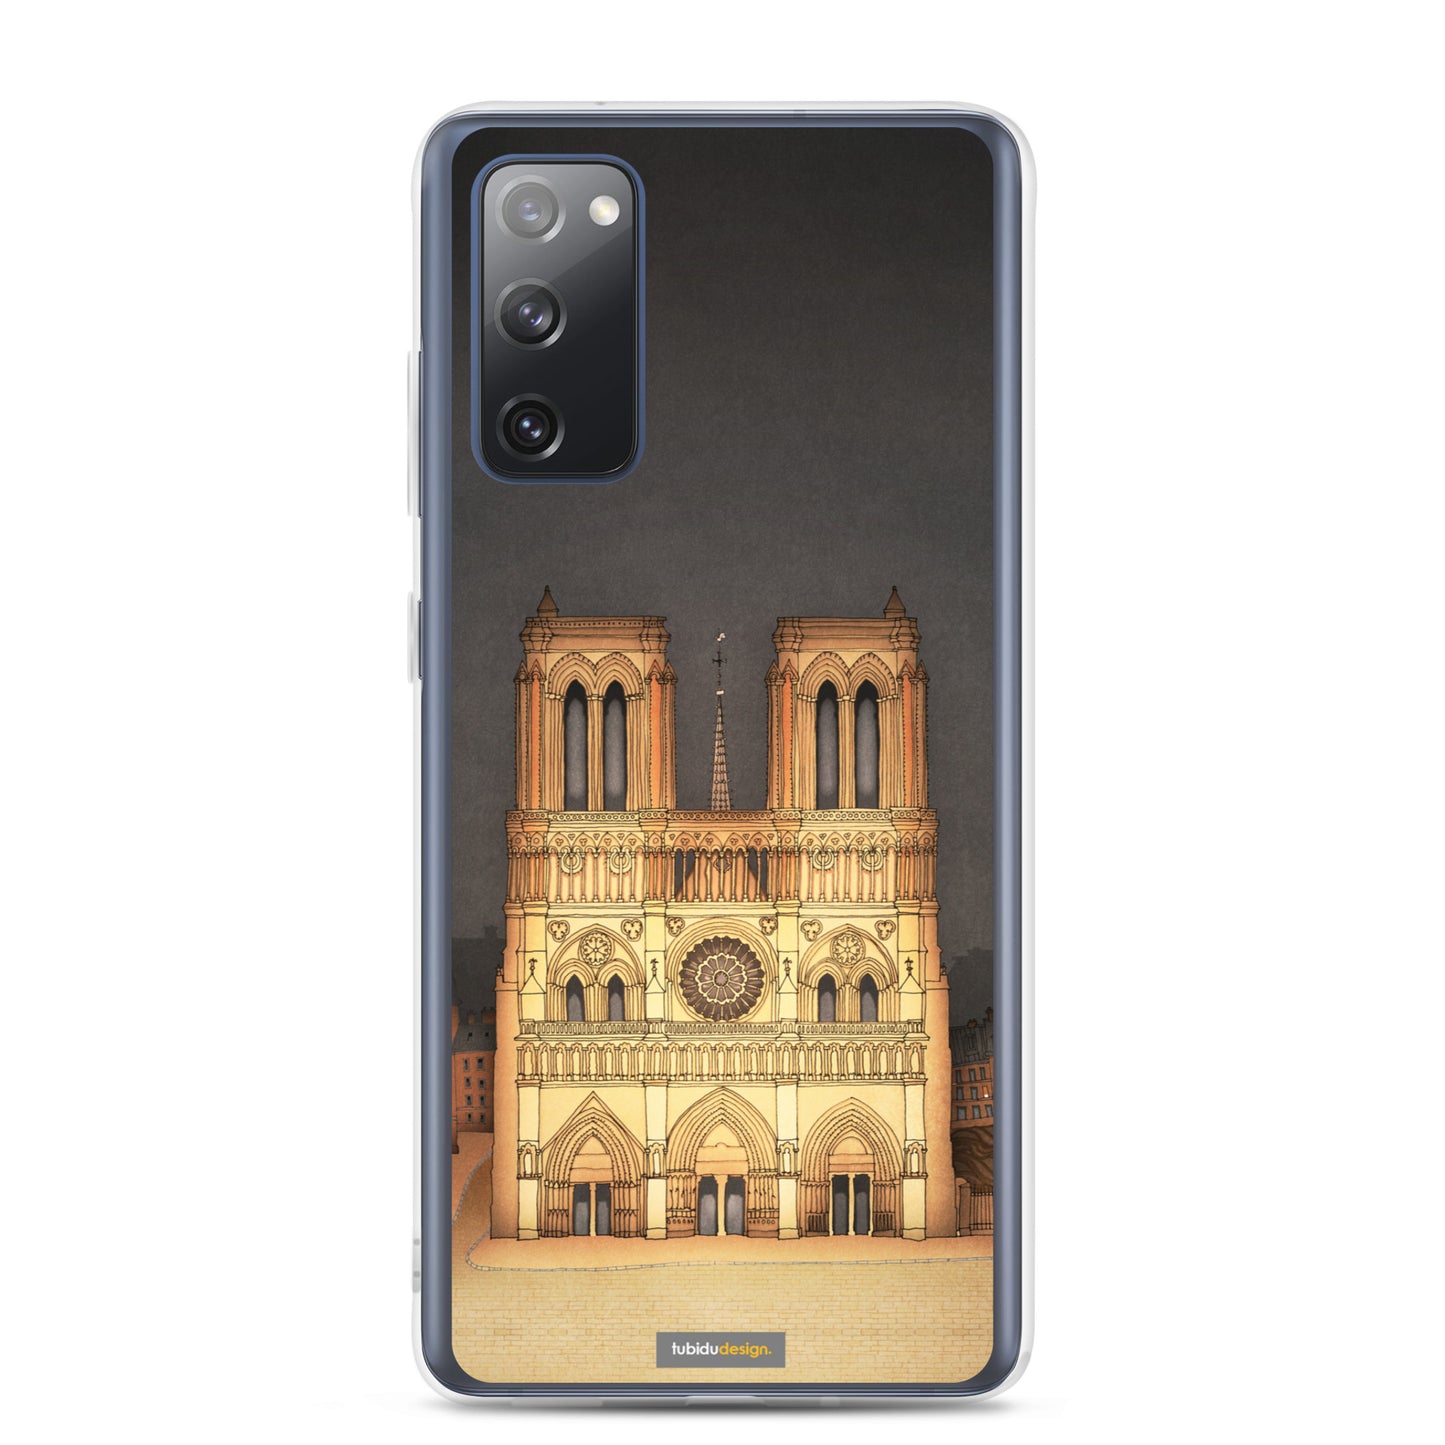 The Notre Dame in Paris - Illustrated Samsung Phone Case